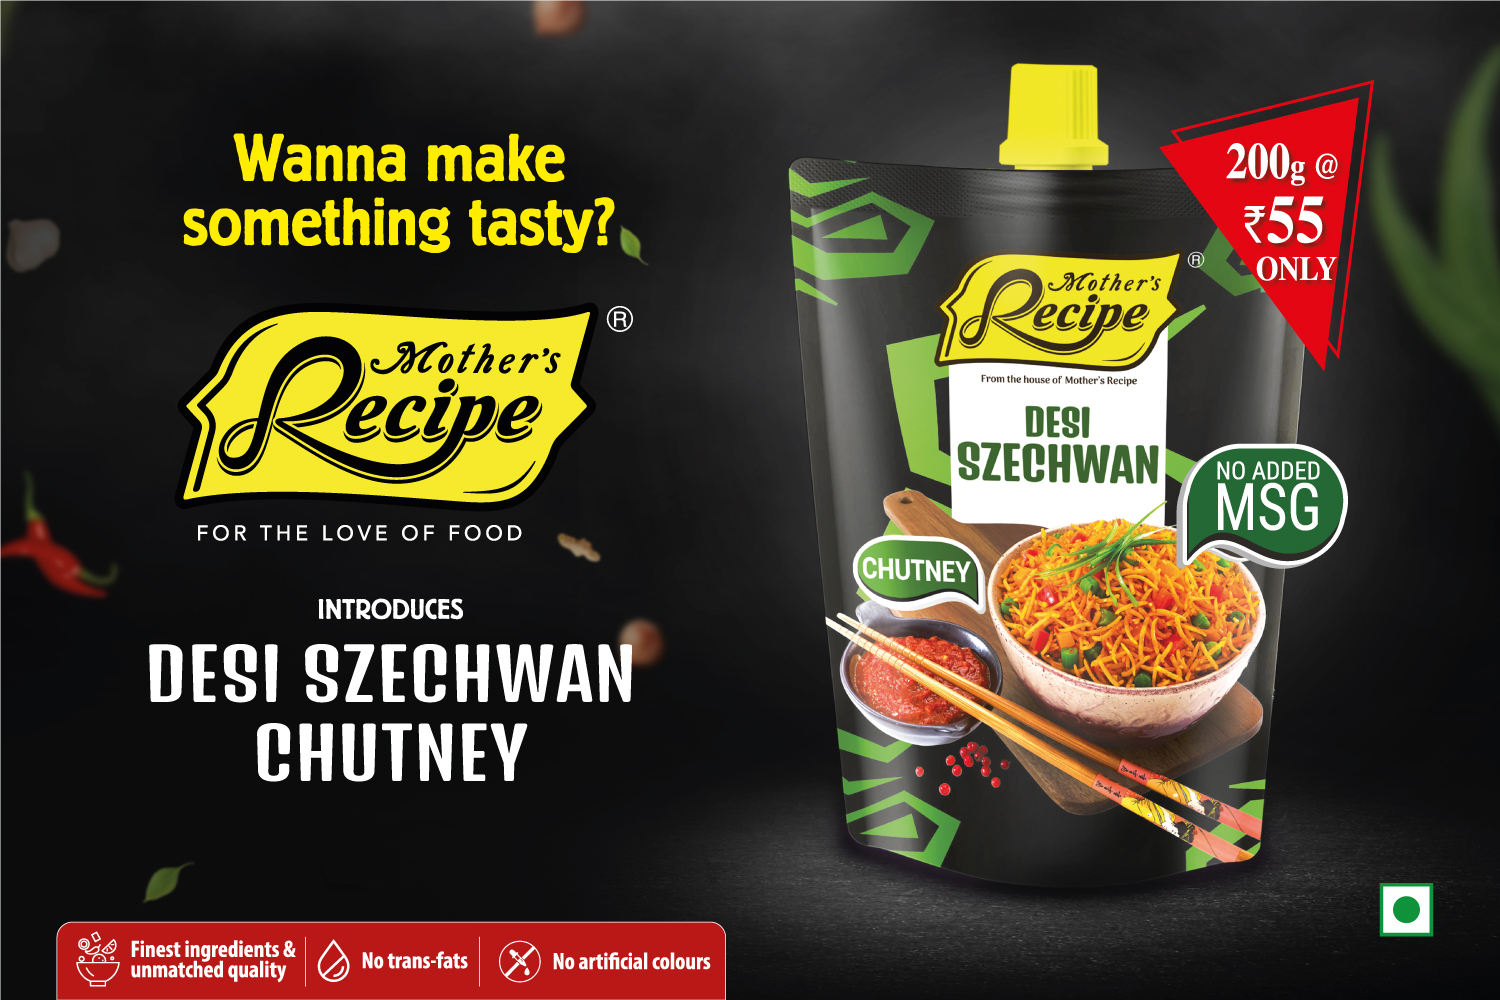 Mother’s Recipe introduces its newly launched spout pack Szechwan chutney decoding=